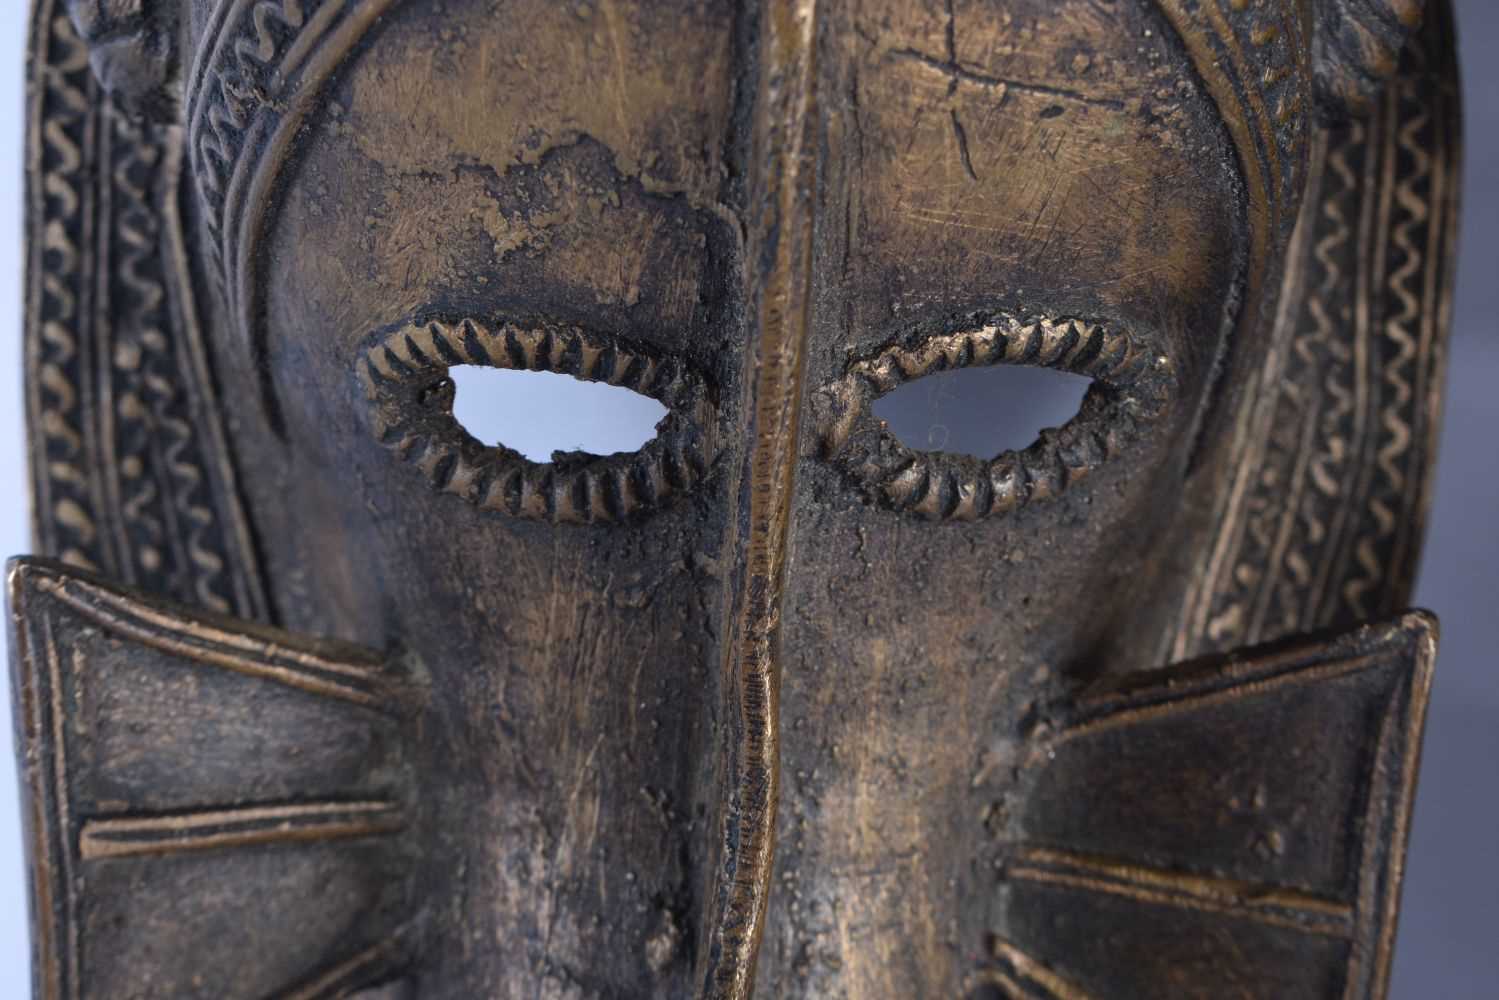 A PAIR OF AFRICAN BRONZE TRIBAL MASKS. 35 cm x 10 cm. - Image 2 of 5